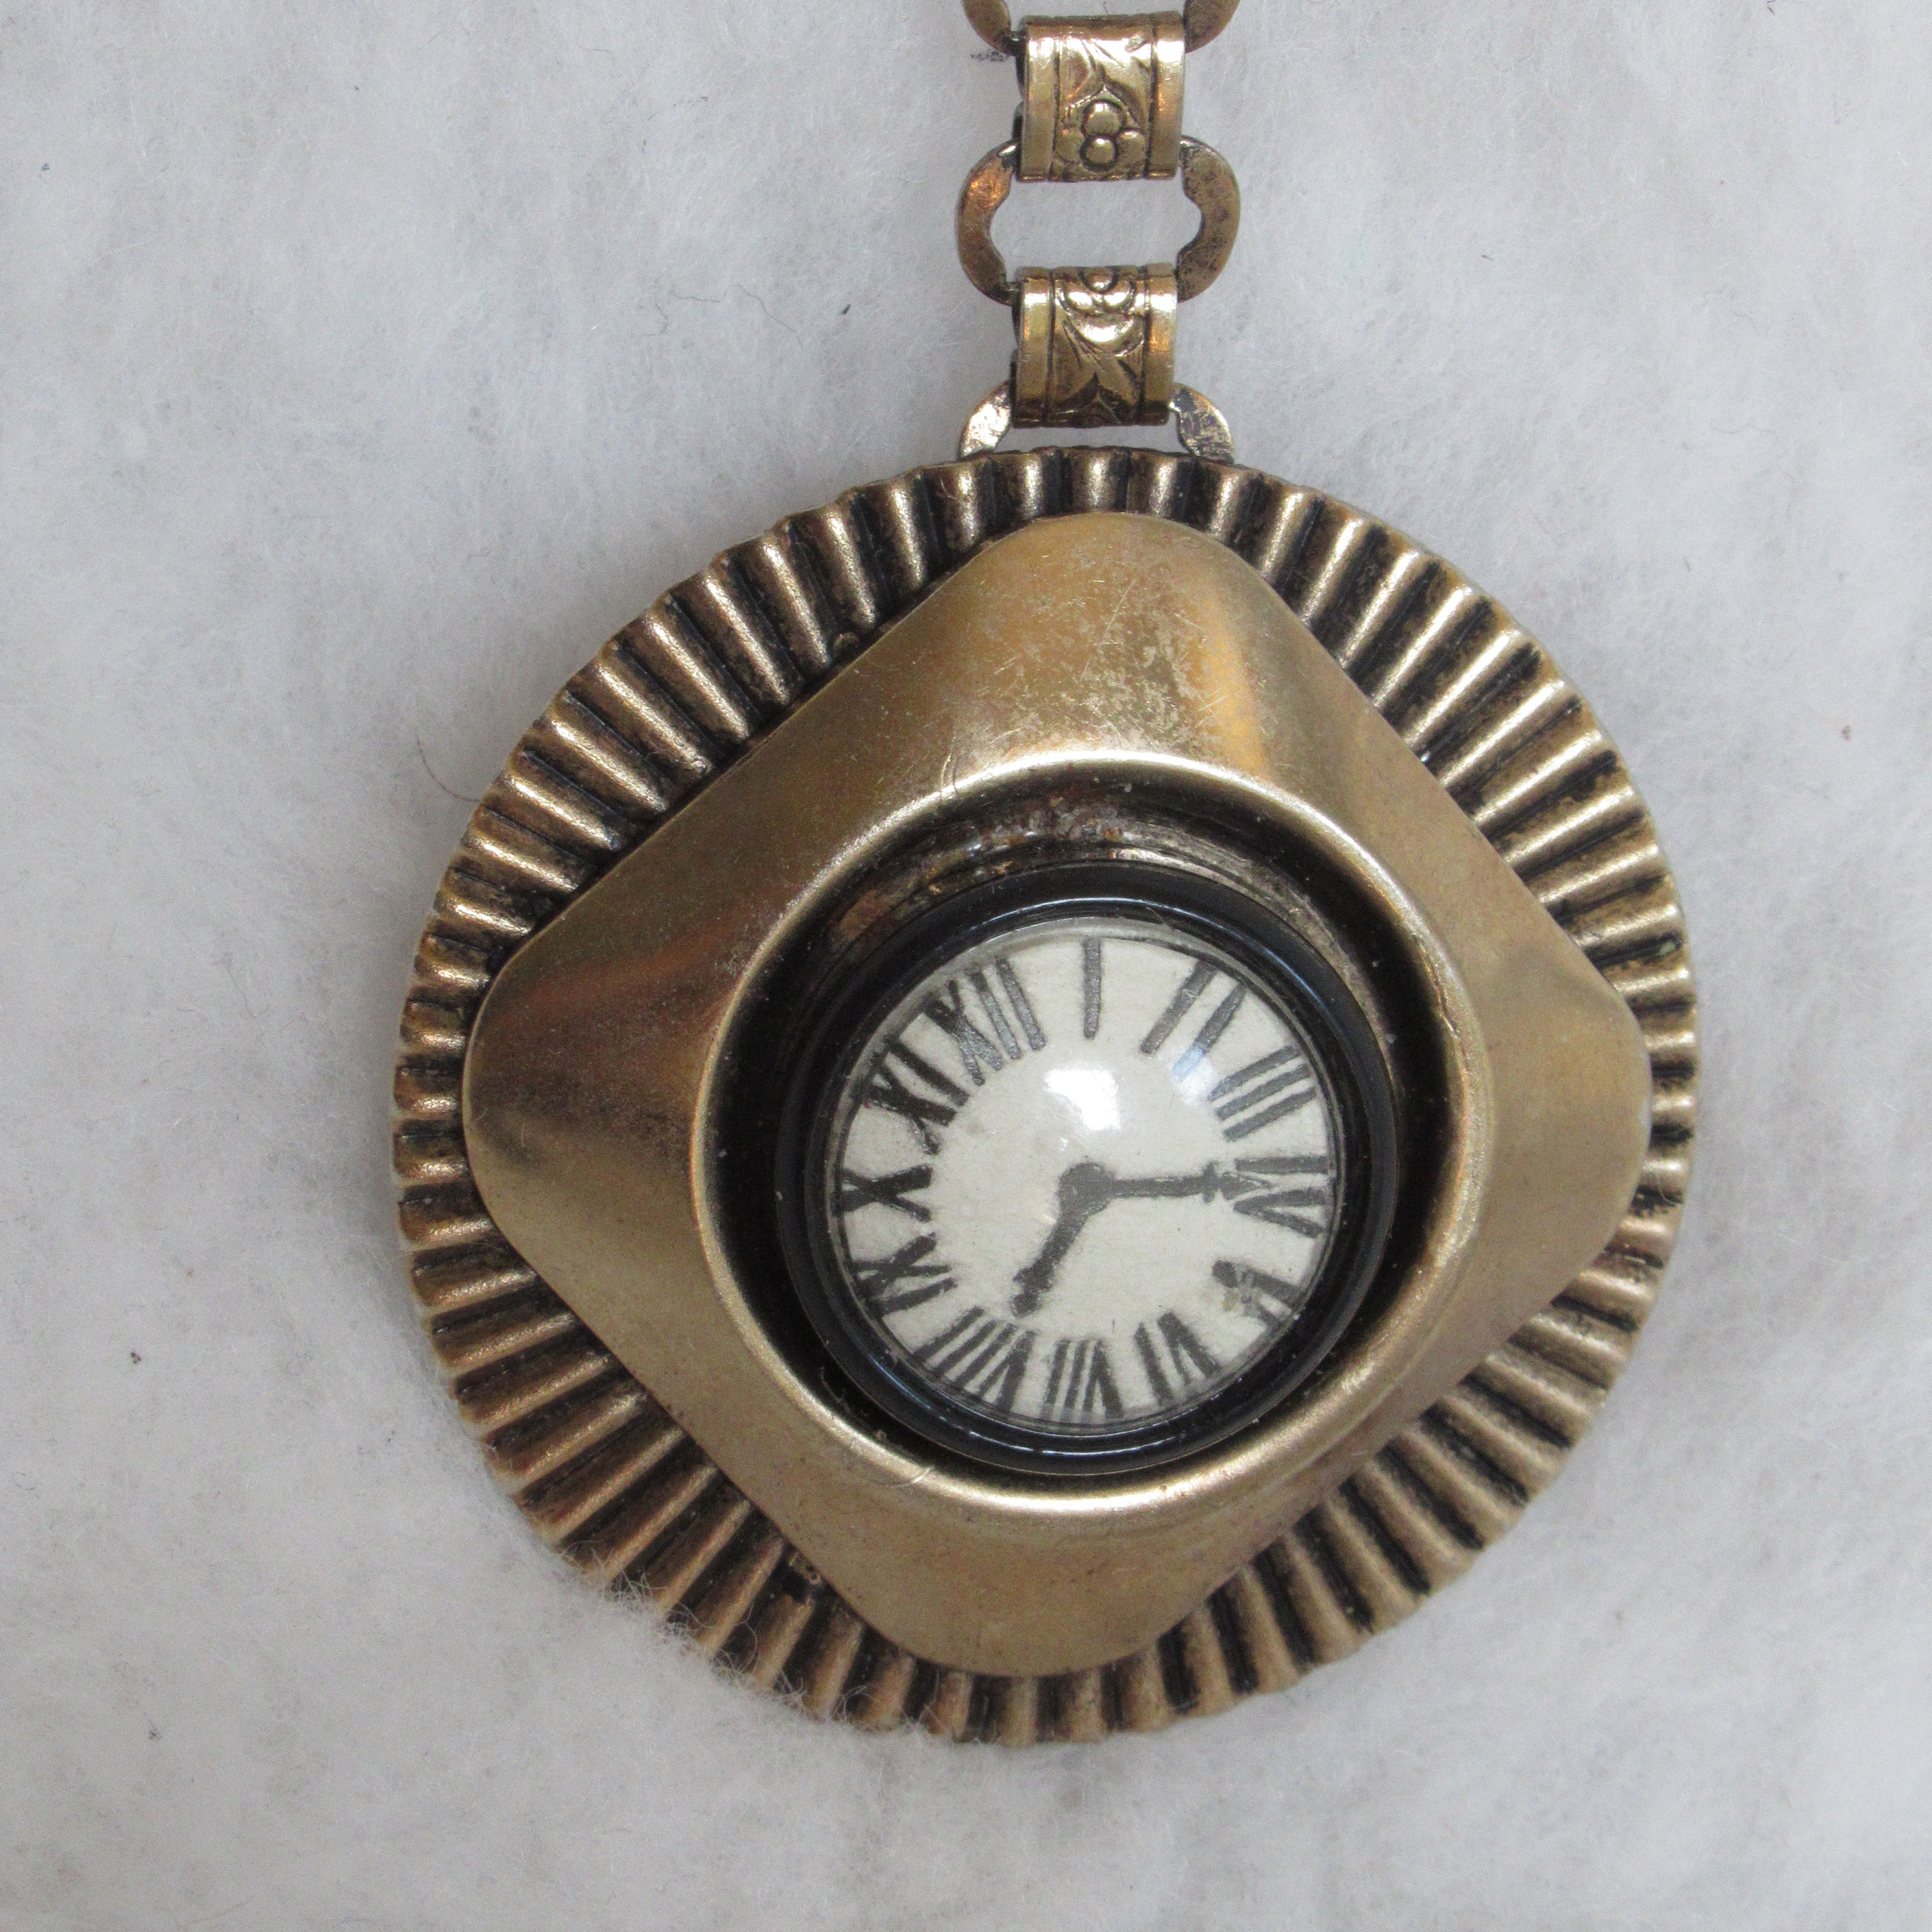 Vintage c. 1940s Enamel Watch Pendant Brooch - Vintage Jewerly Collect